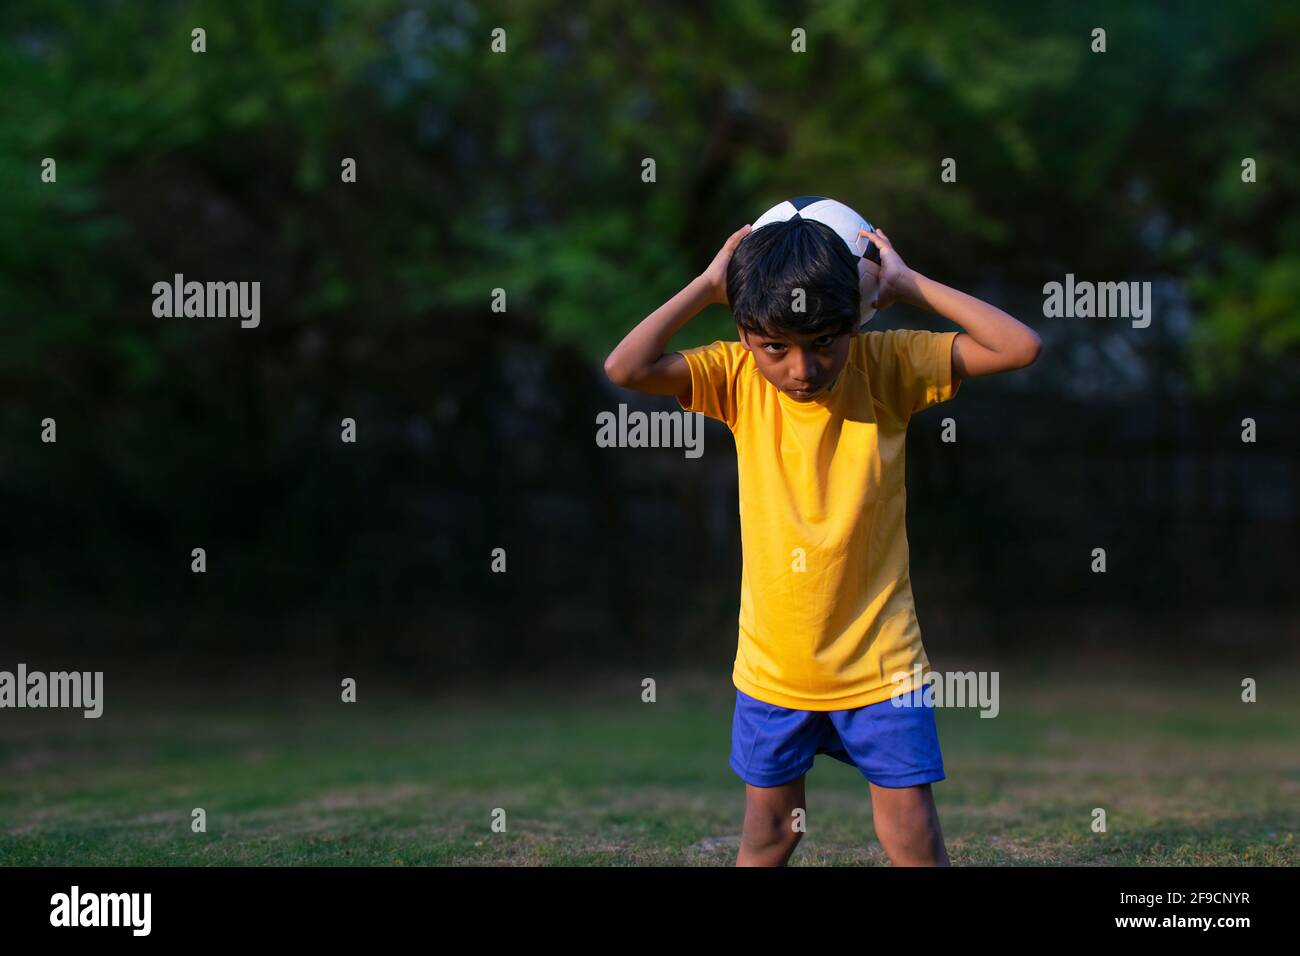 Portrait Of A Young Boy  throwing football Stock Photo